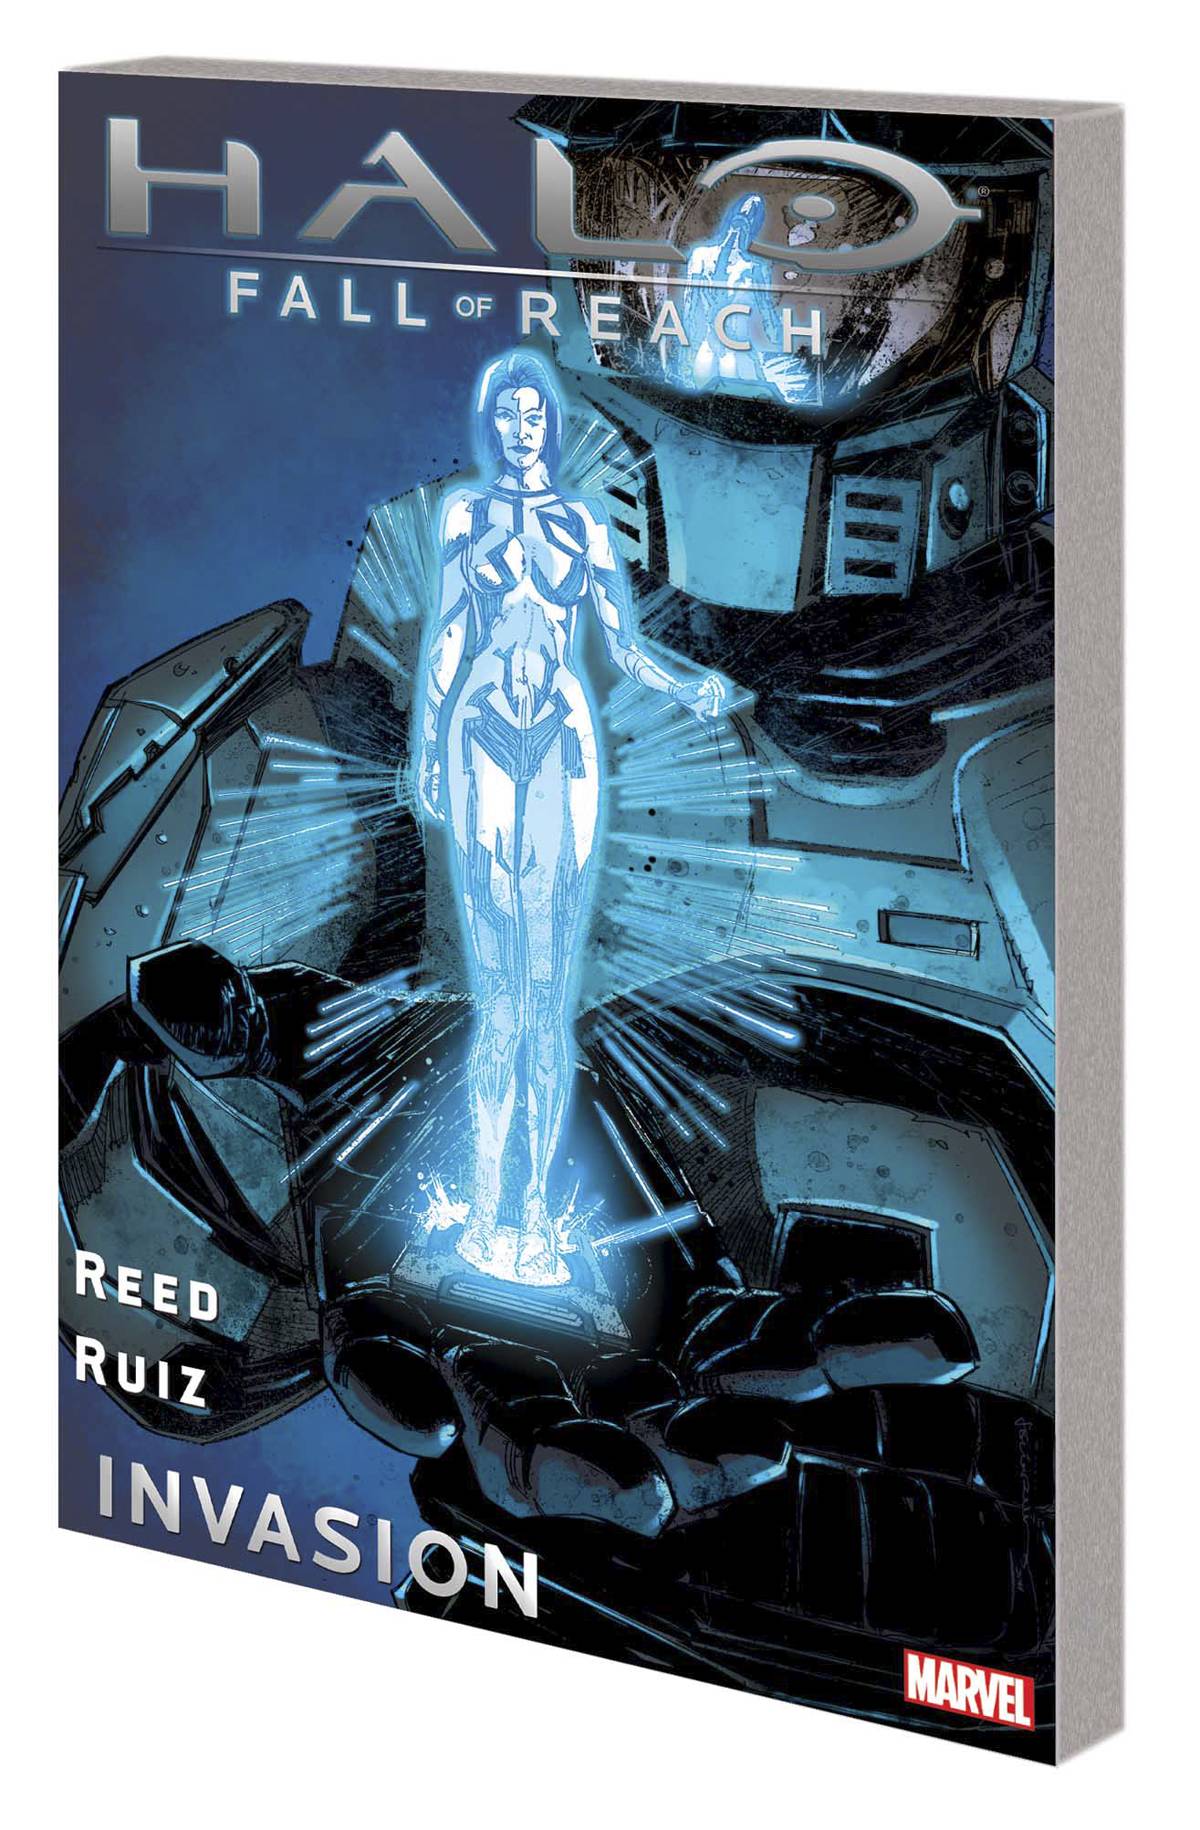 Halo Fall of Reach Invasion Graphic Novel